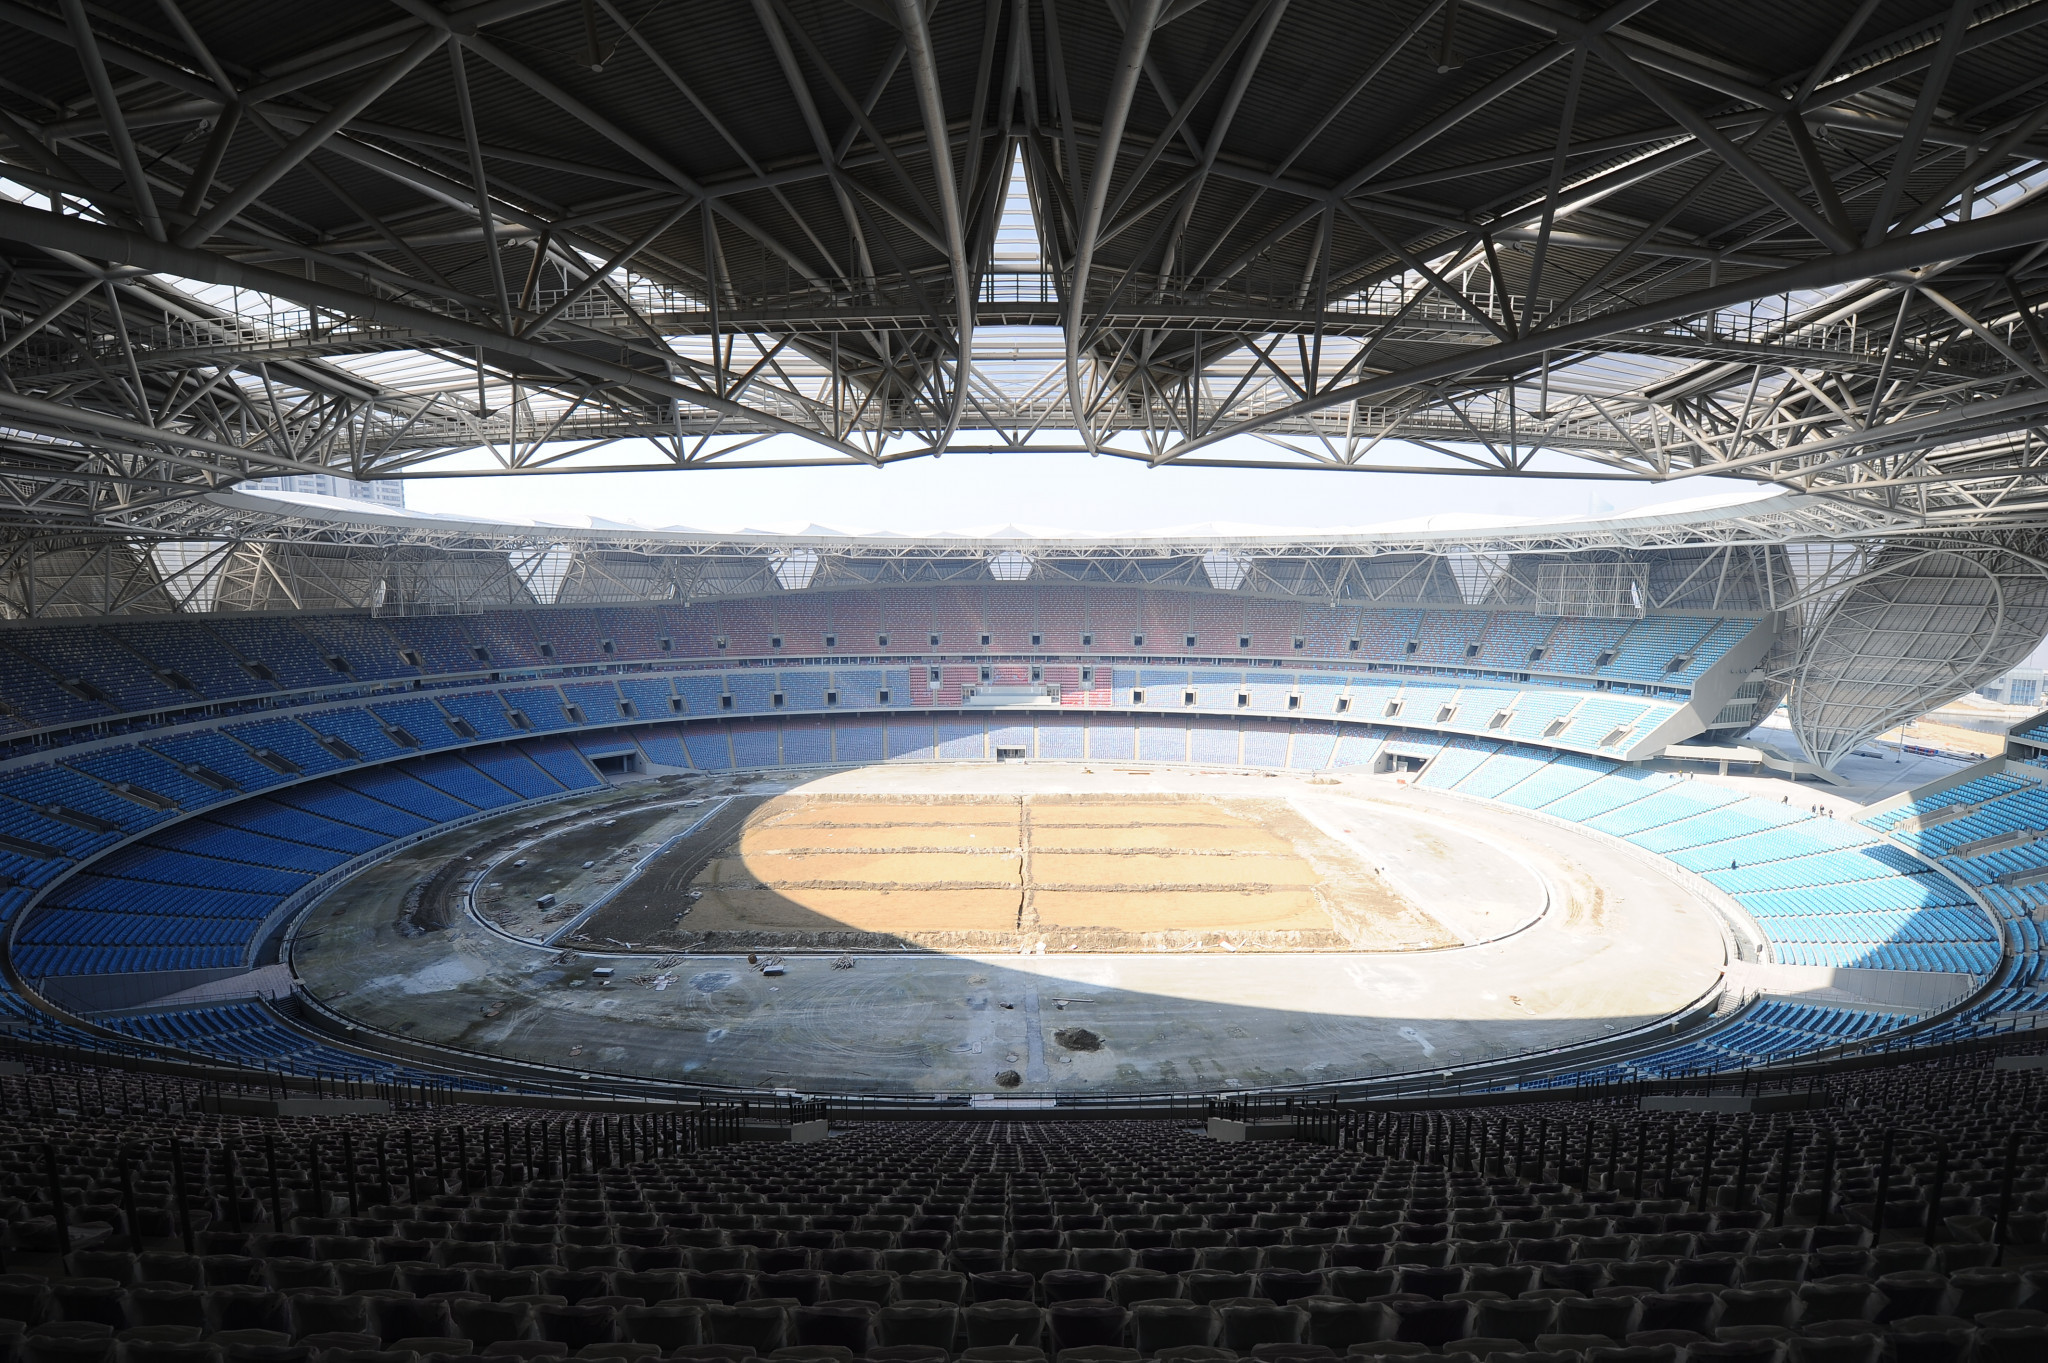 The stadium nicknamed Big Lotus has been given final approval for Hangzhou 2022 ©Getty Images